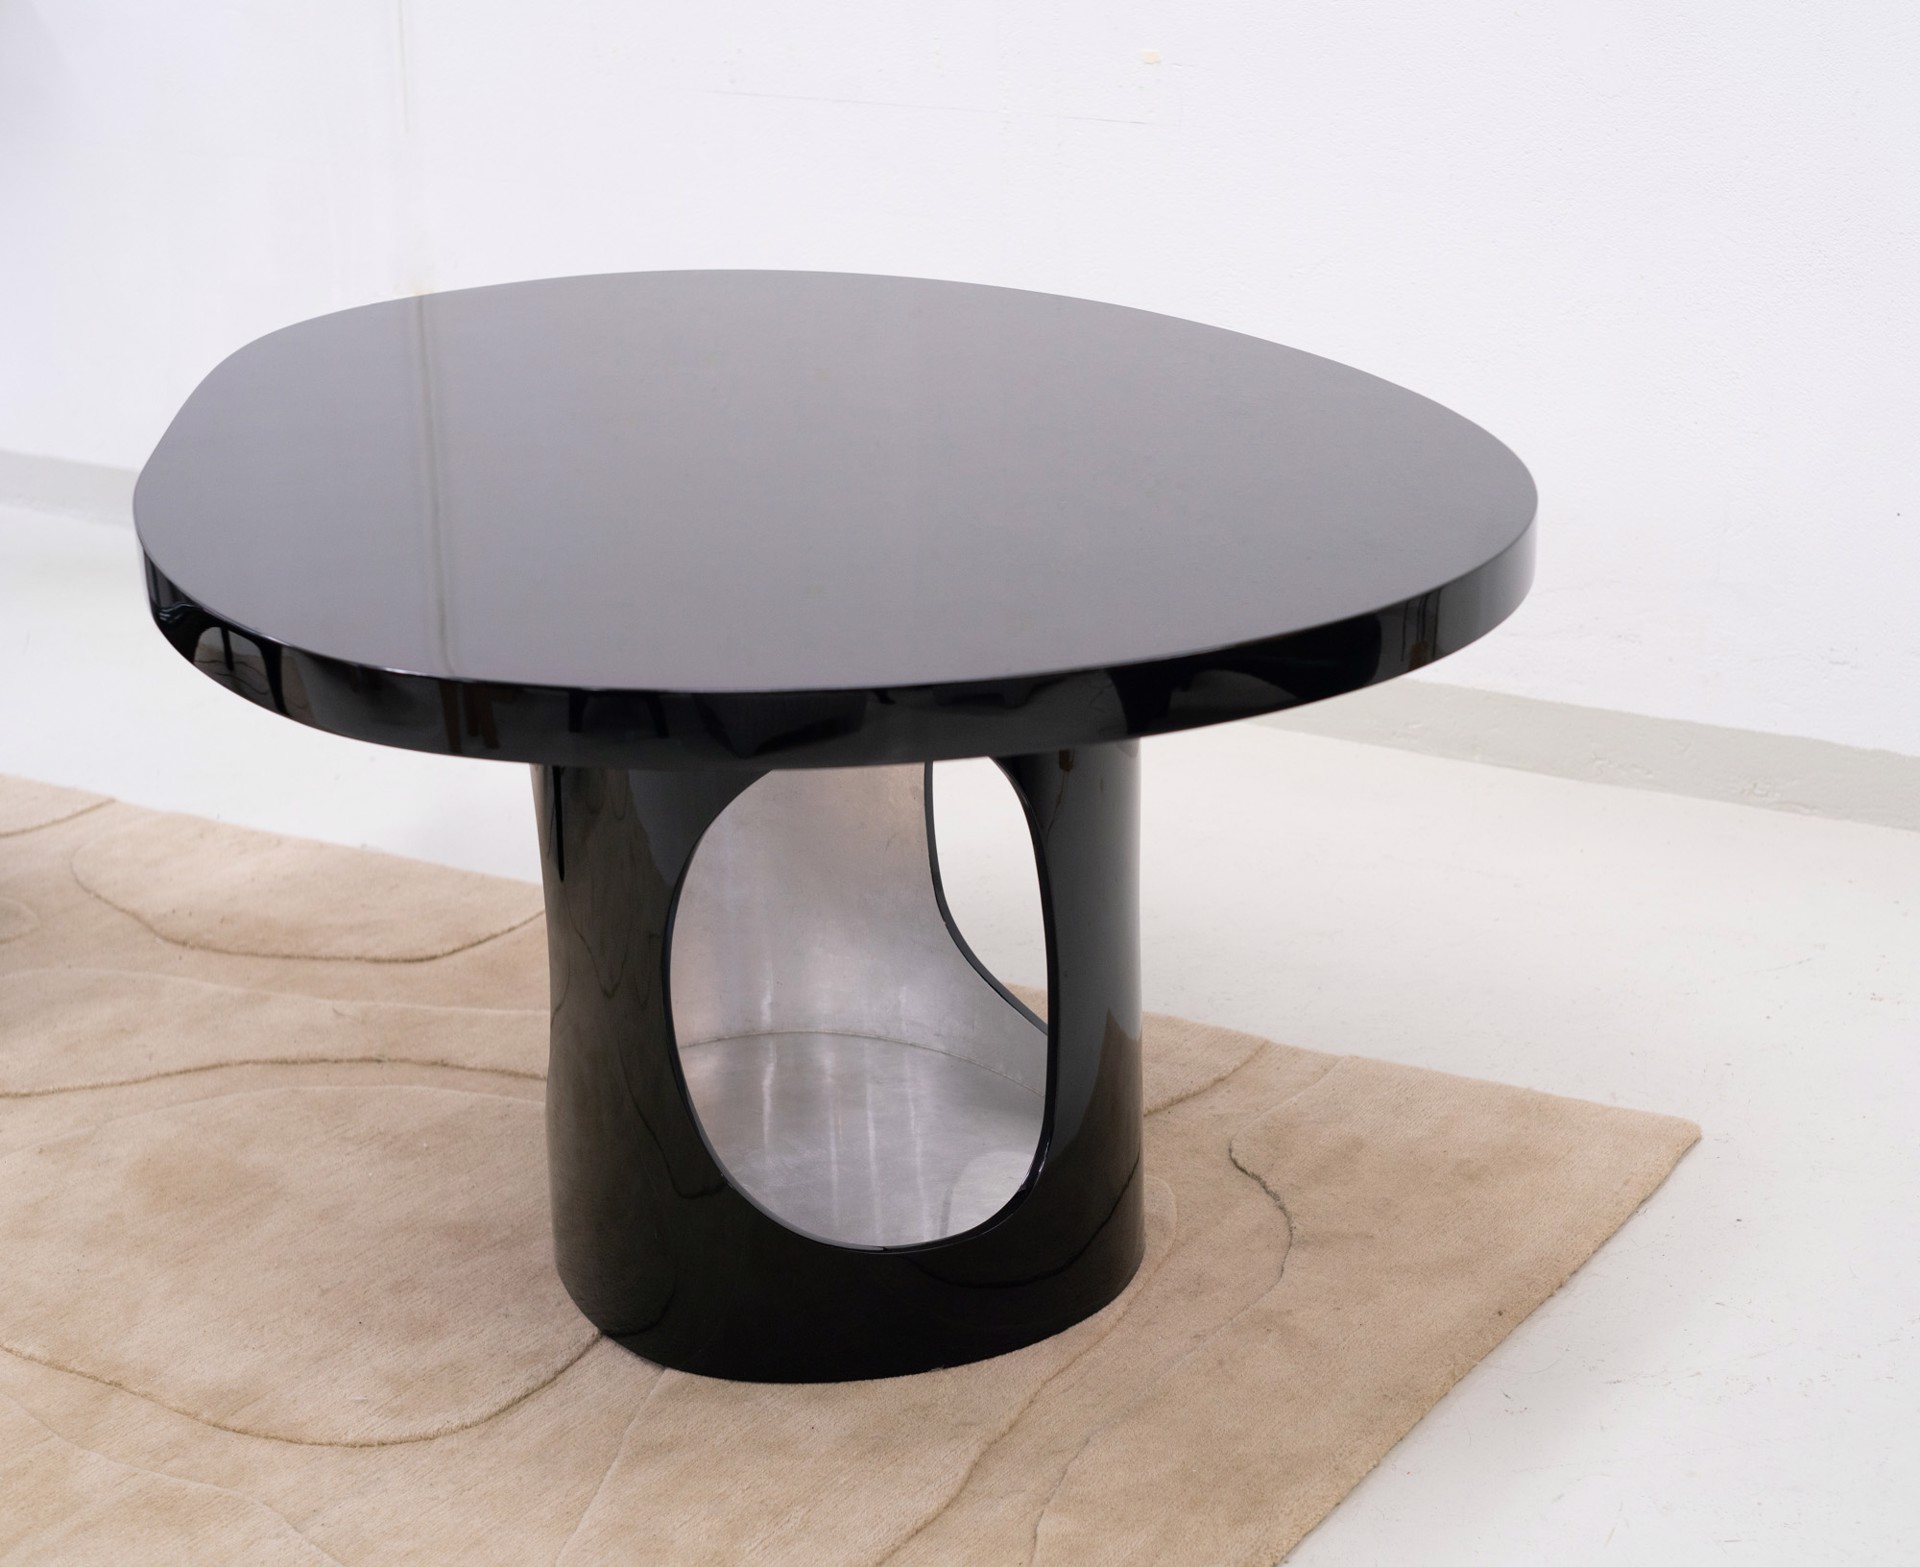 Custom "Cloud" Center table by Jacques Jarrige